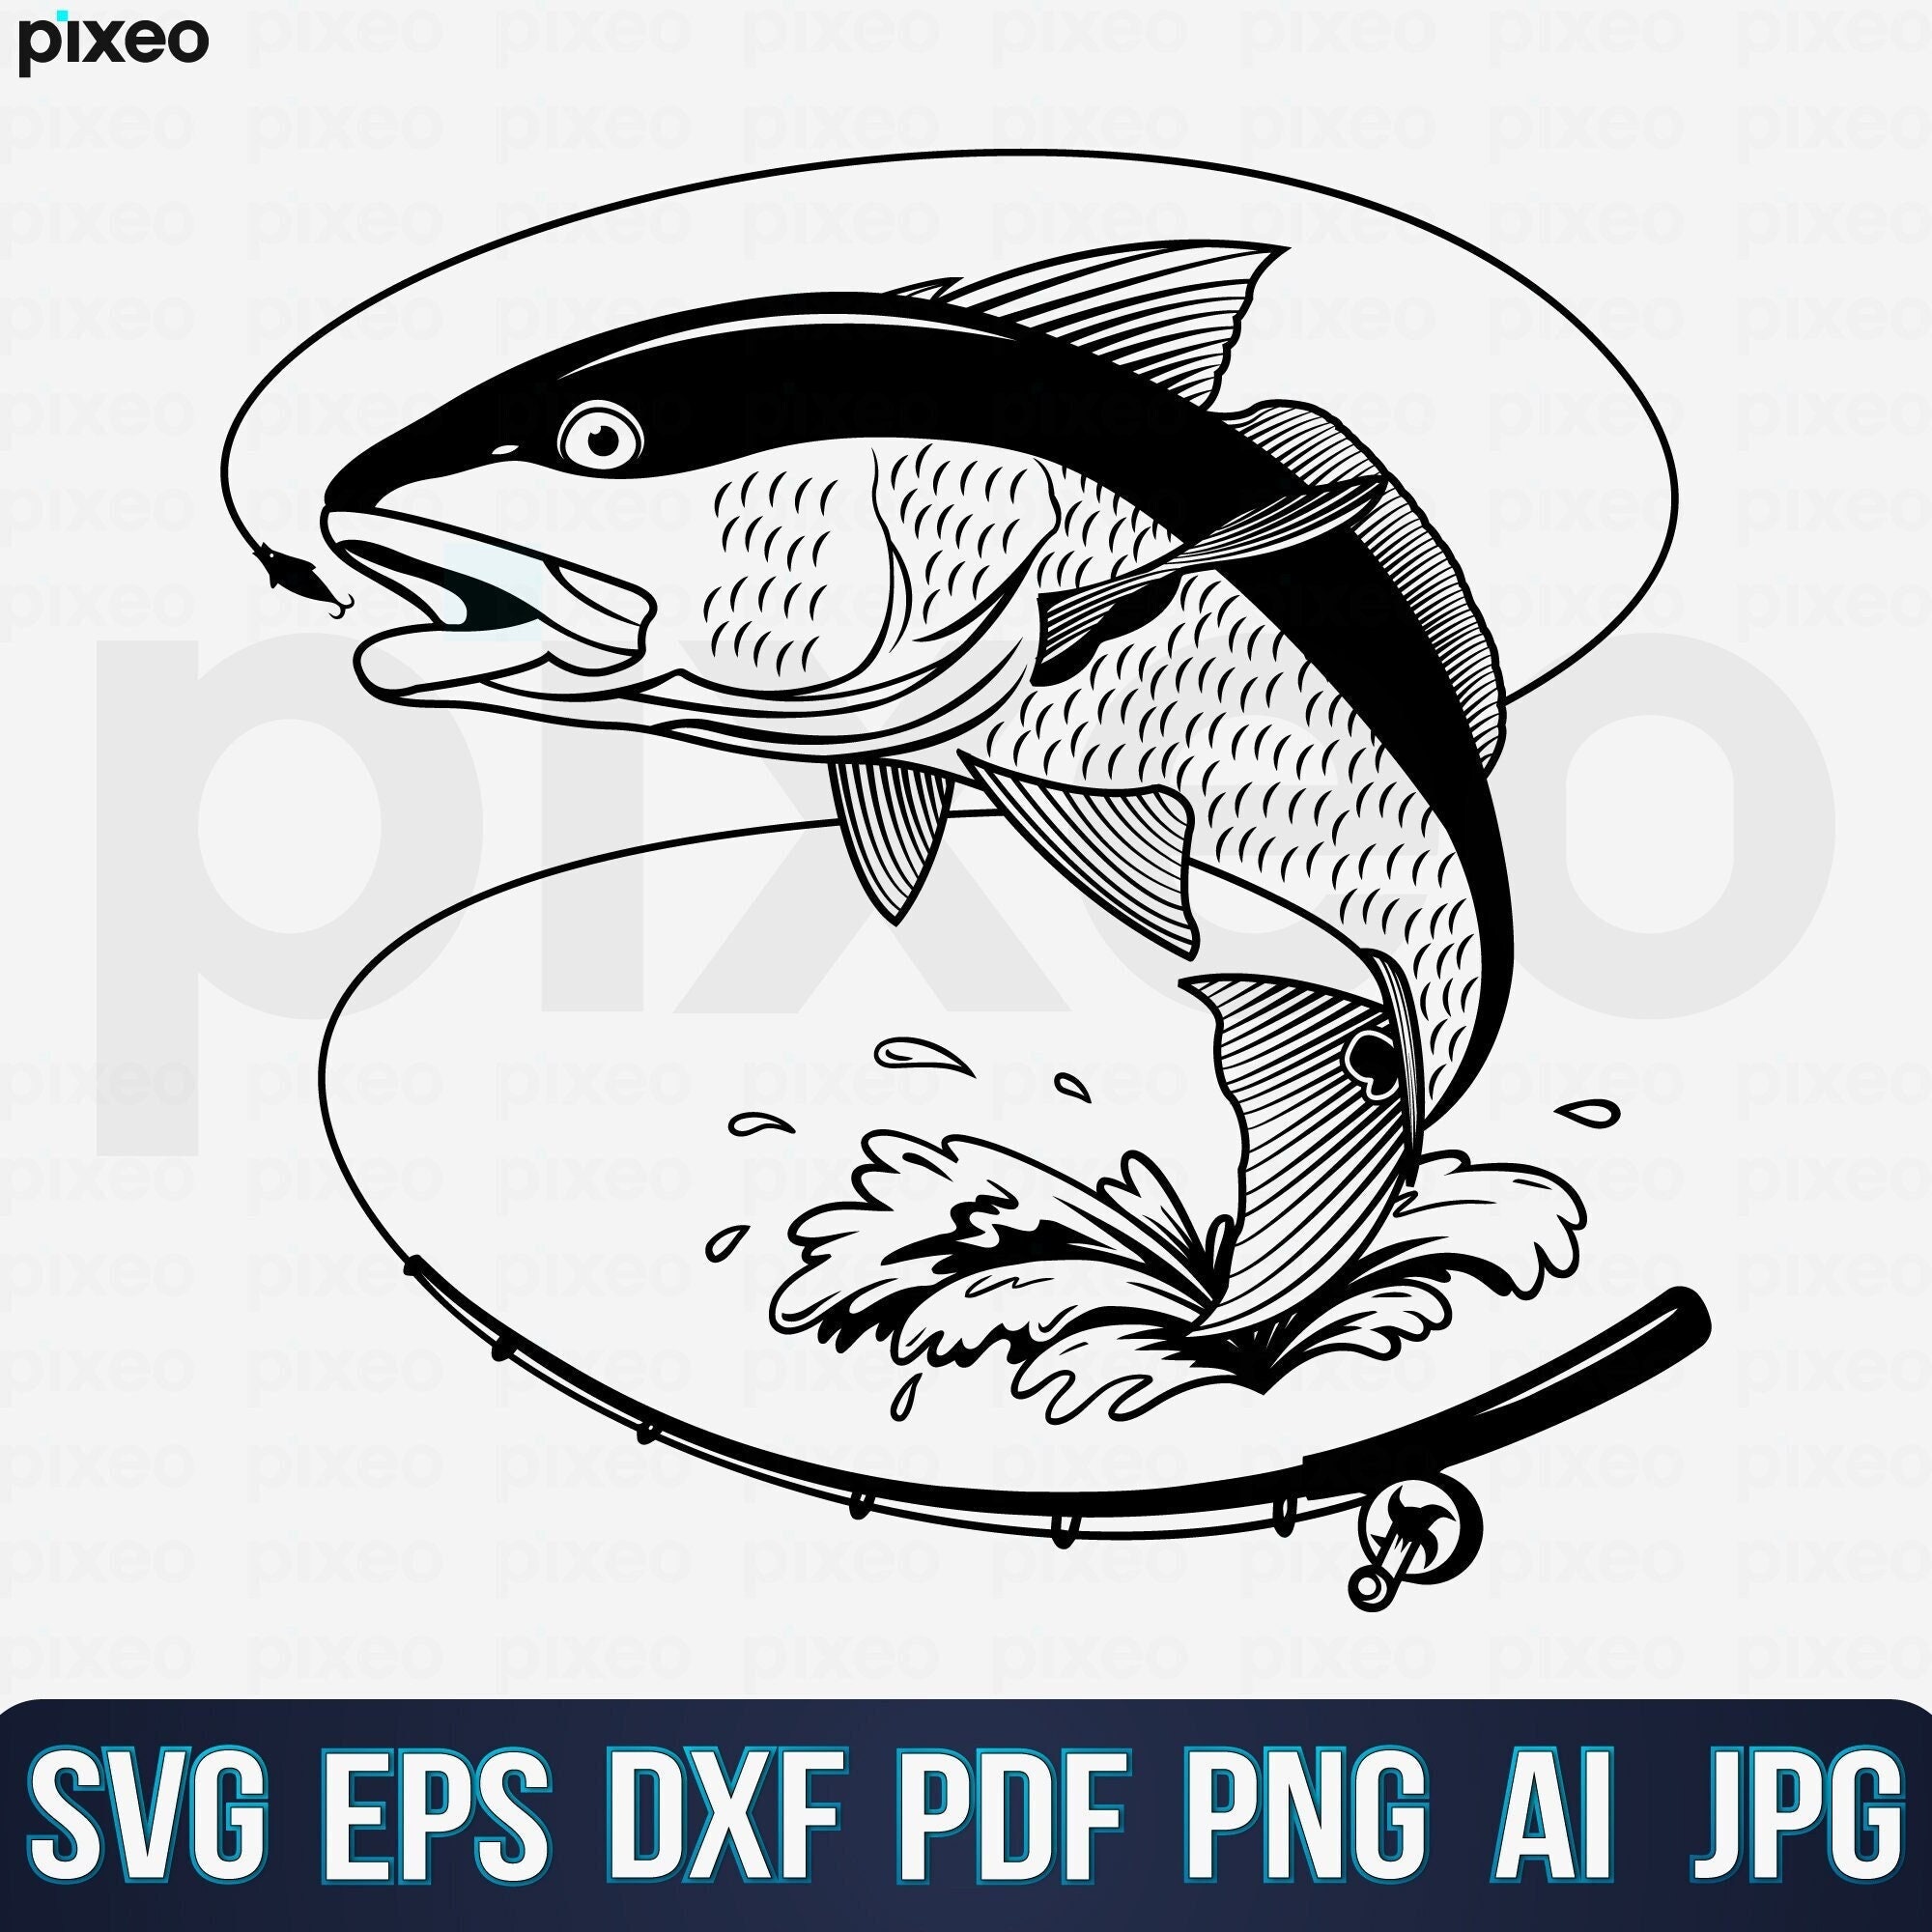 one fish two fish red fish blue fish Svg Dxf Eps Png file – lasoniansvg